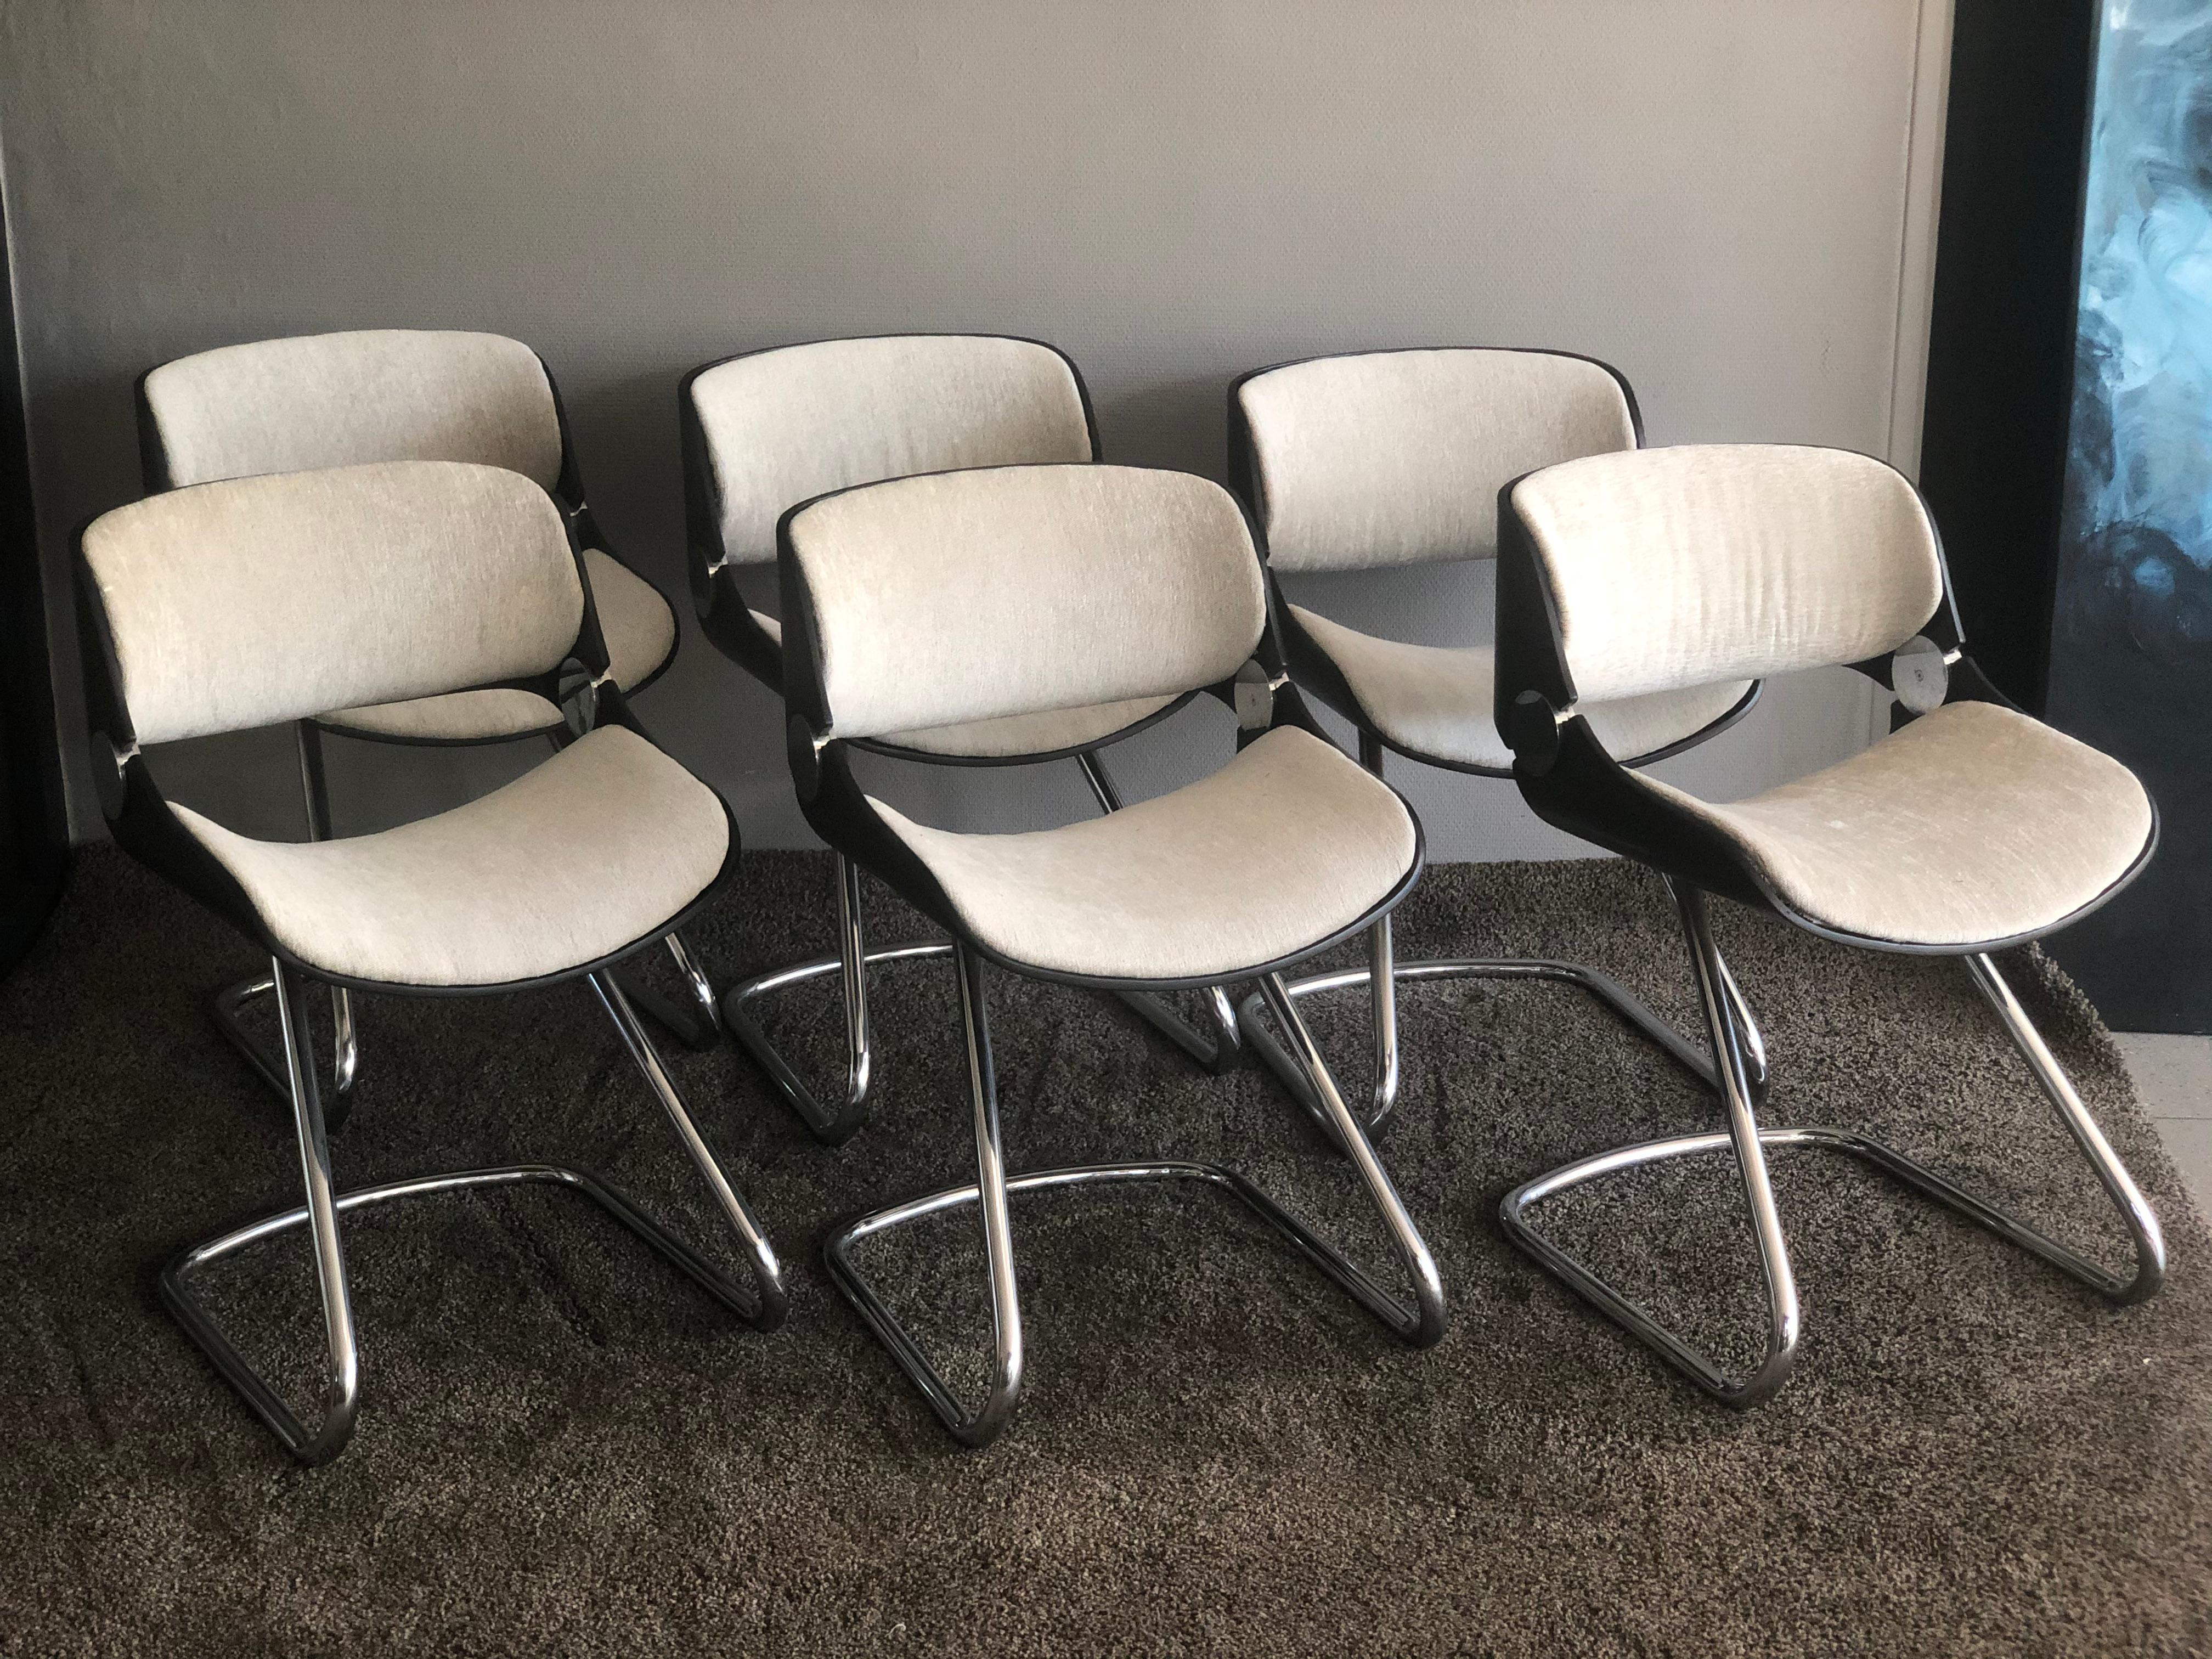 Set of 6 Etienne Fermigier chairs, fully restored in 1970. New fabric, seat in thermofolded wood. Wood hull in good condition and base in non-quilted chrome Dimensions: 73 x 47 x 47 cm.